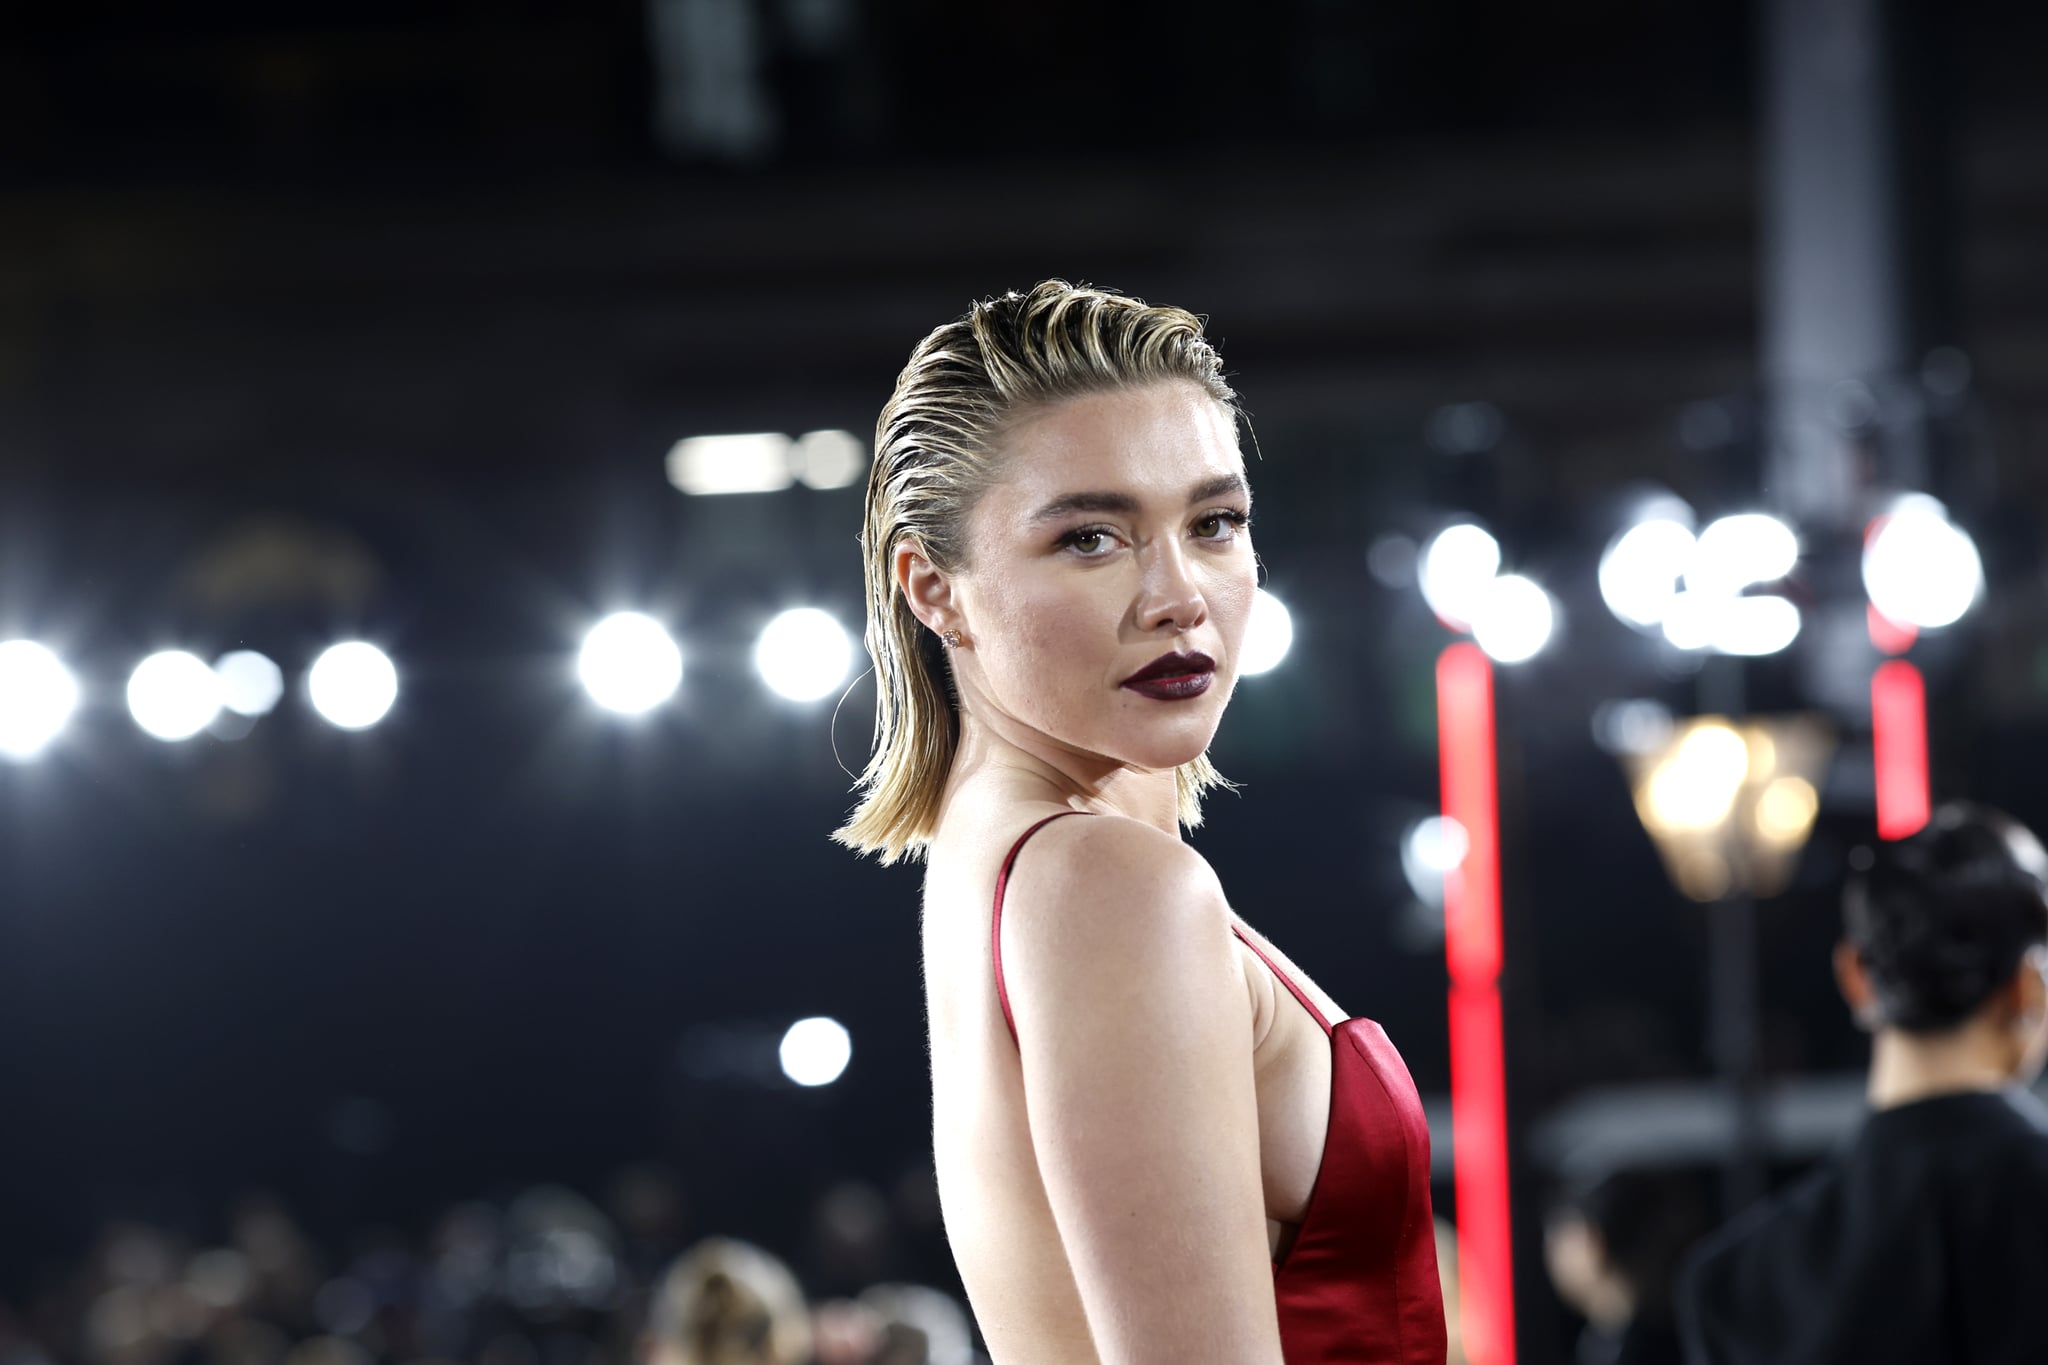 LONDON, UK - DECEMBER 5: Florence Pugh attends Fashion Awards 2022 at Royal Albert Hall on December 5, 2022 in London, UK.  (Photo by John Phillips/BFC/Getty Images for BFC)